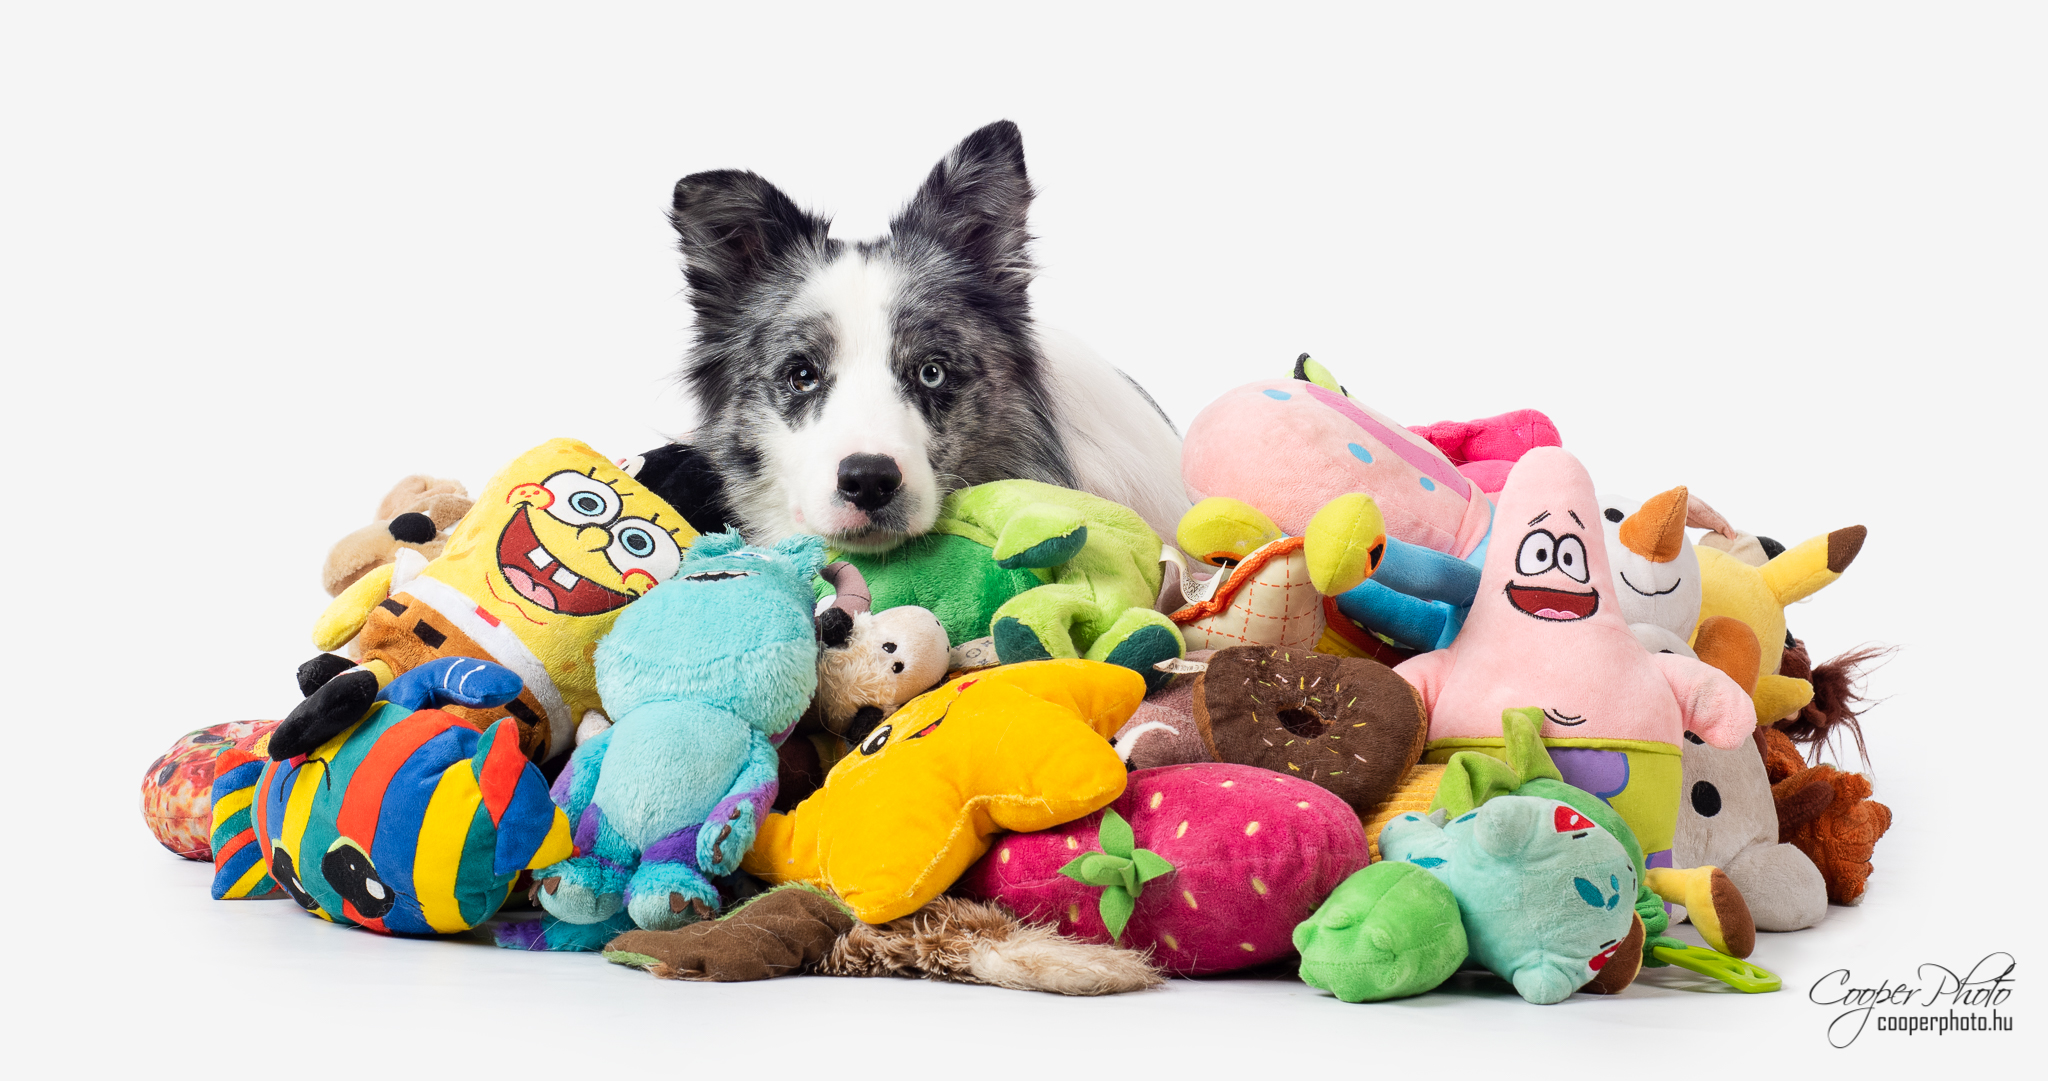 Anxious dogs can improve their memory by chewing on toys, study suggests